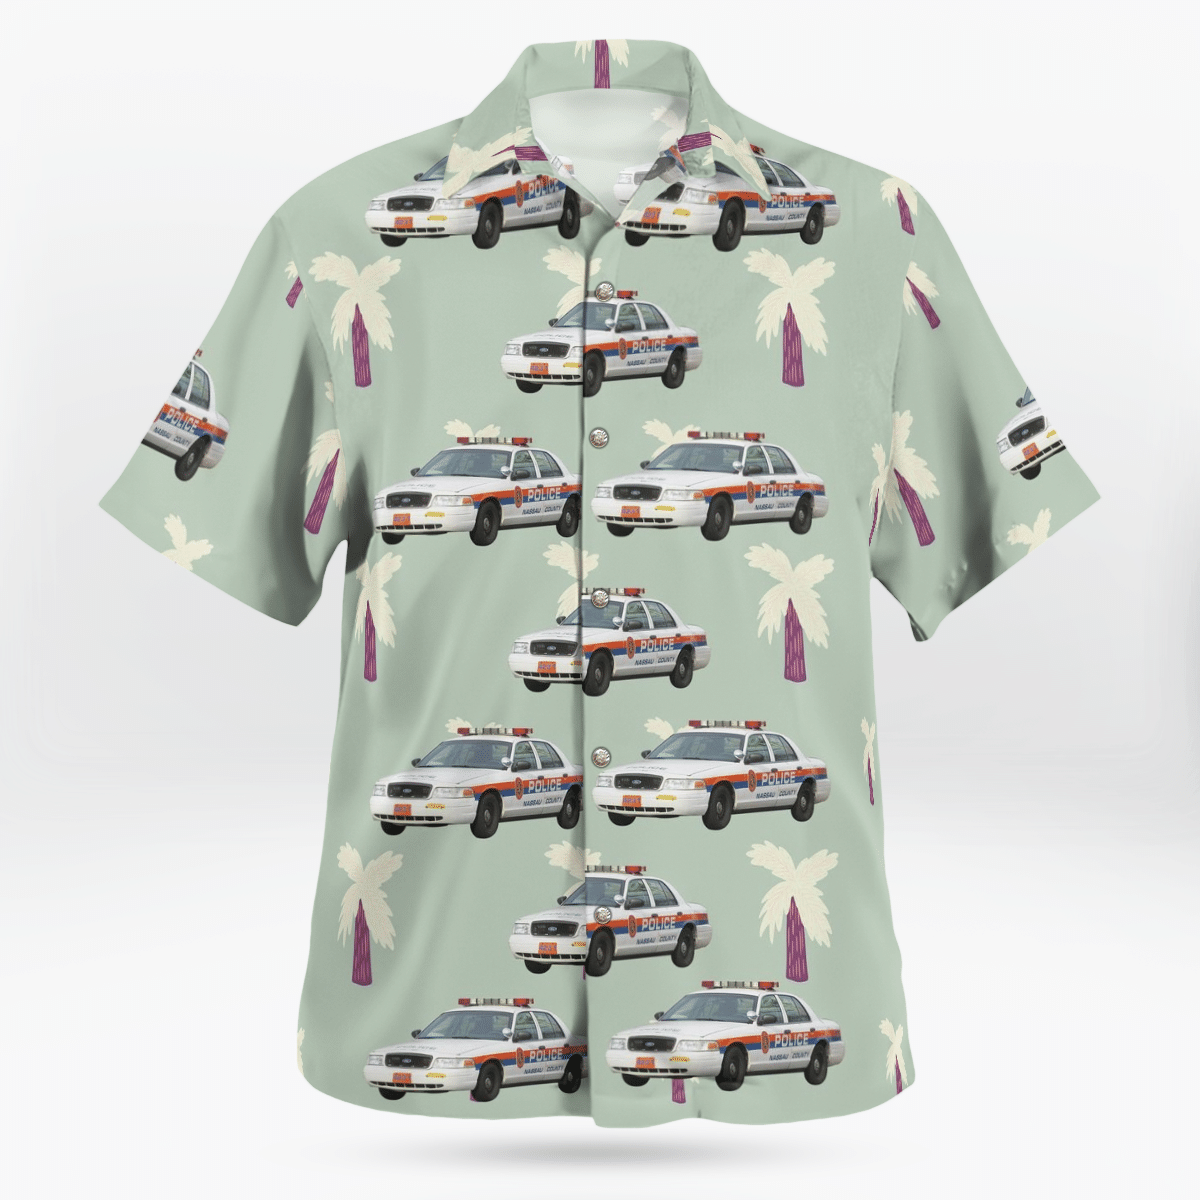 Hawaiian shirts never go out of style 220